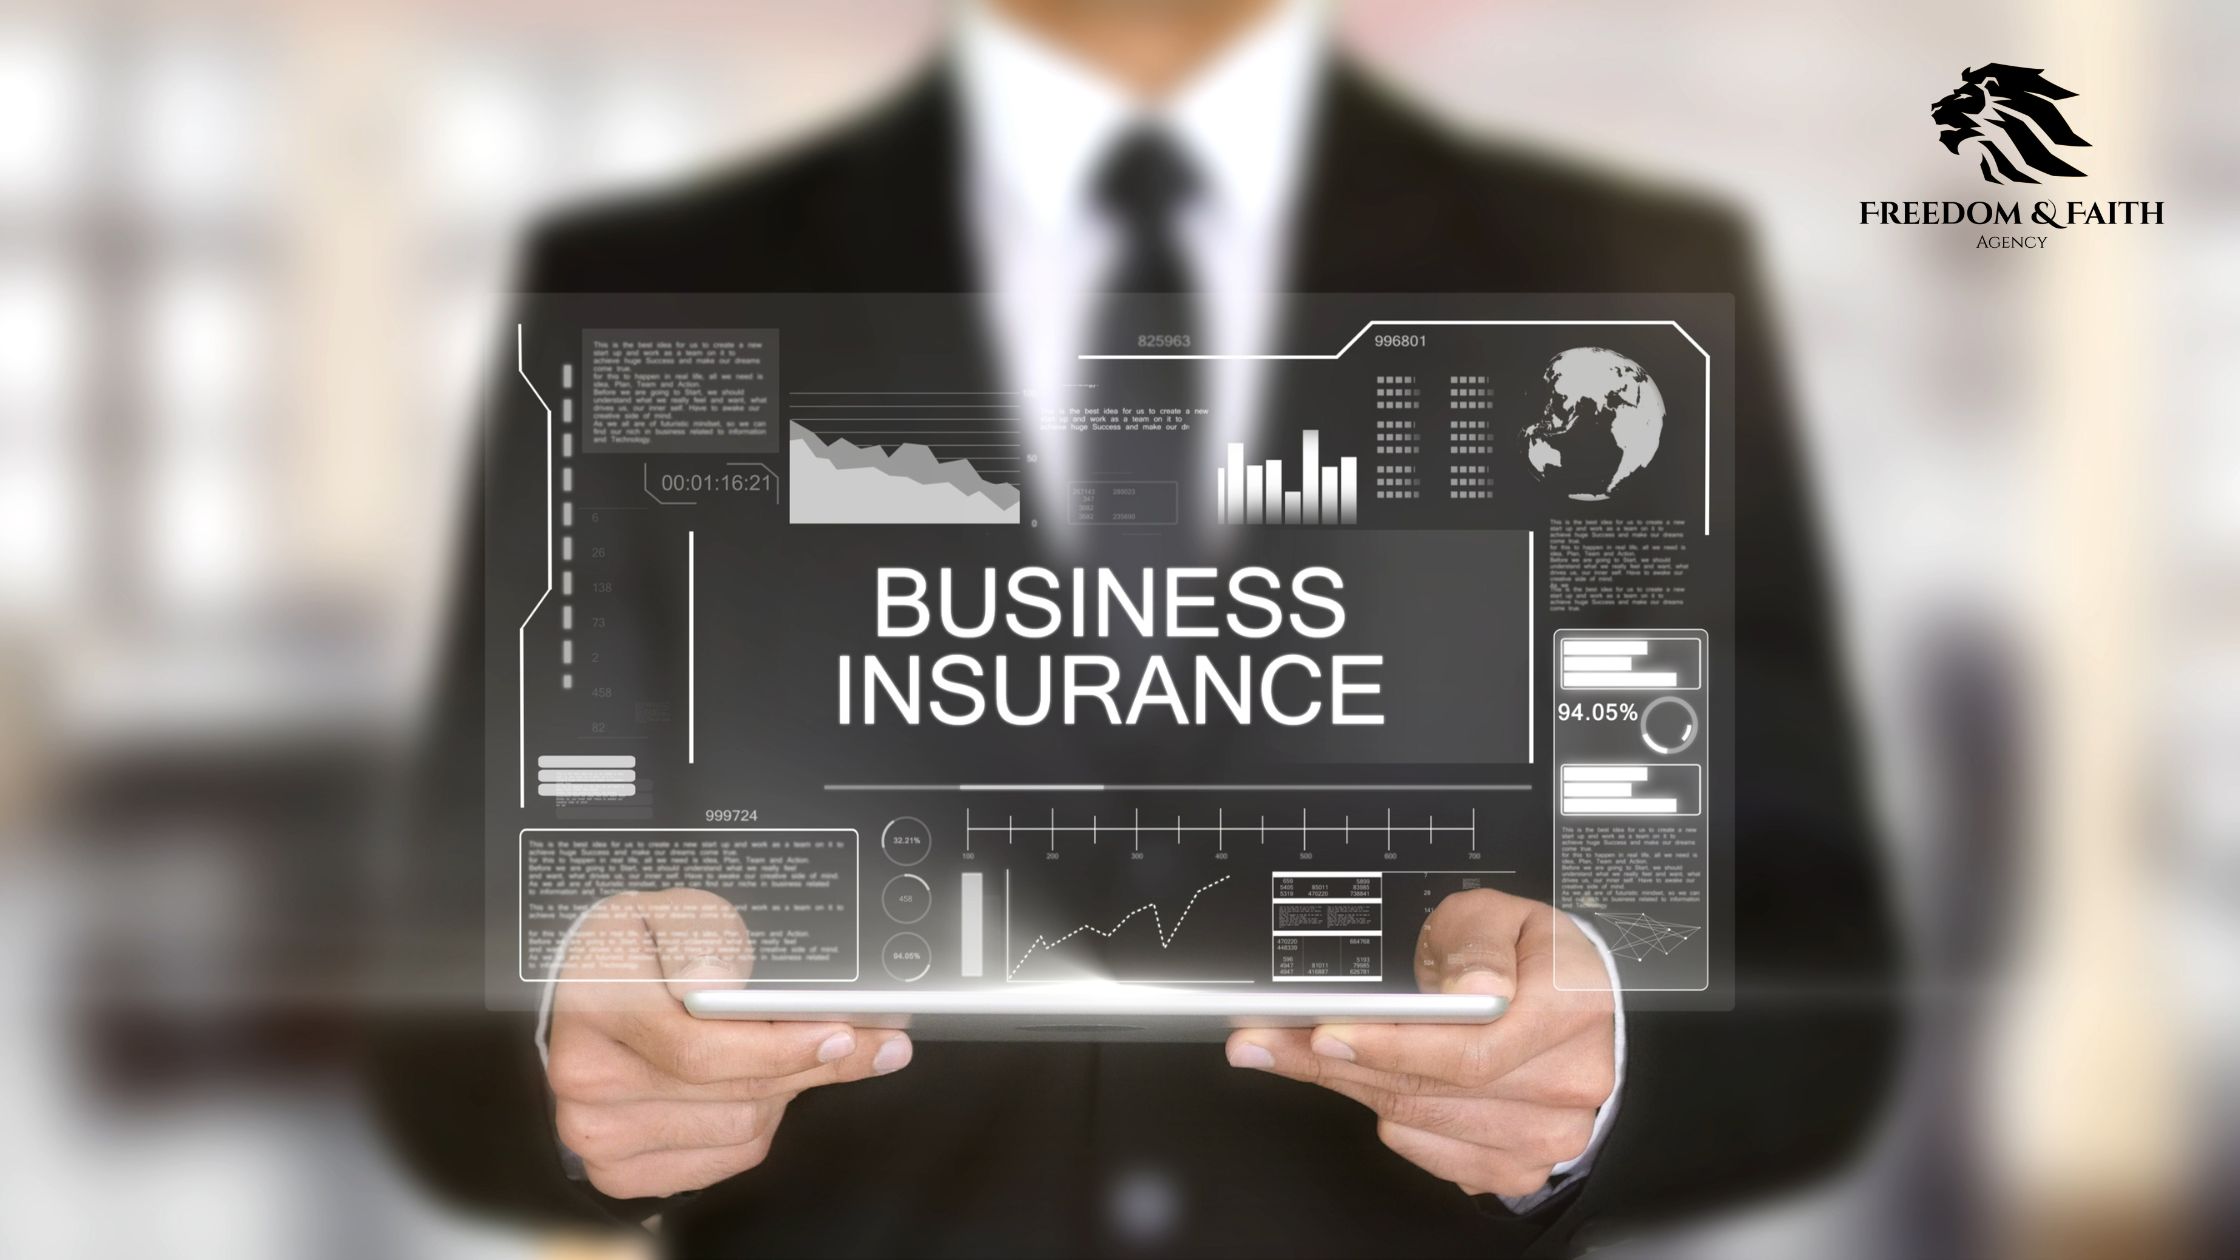 6 Amazing Ideas to Build Your Insurance Business